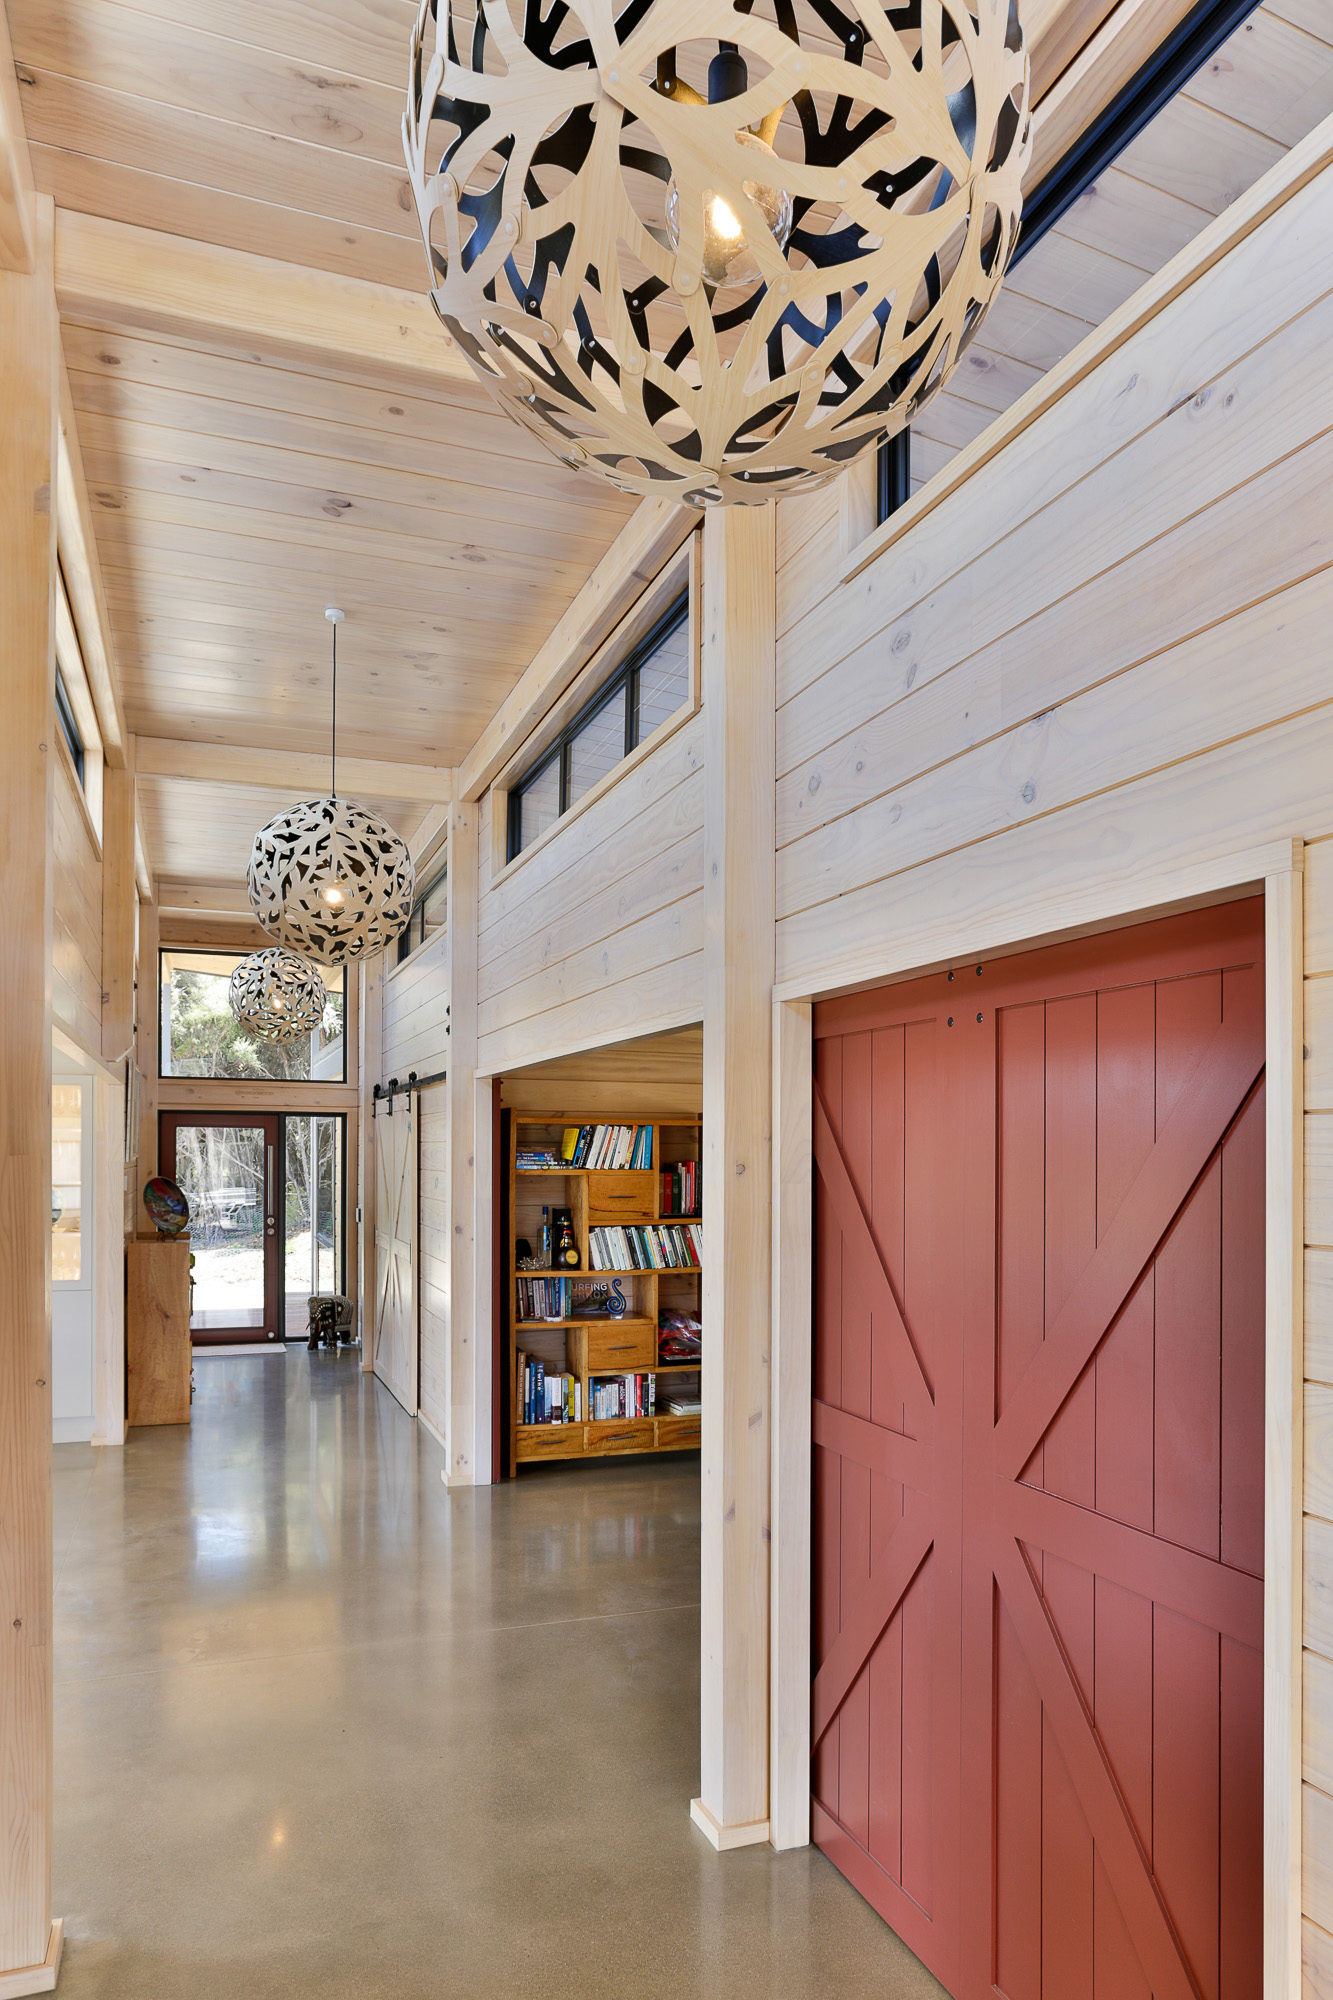 Clerestory windows bring natural light into this Lockwood home